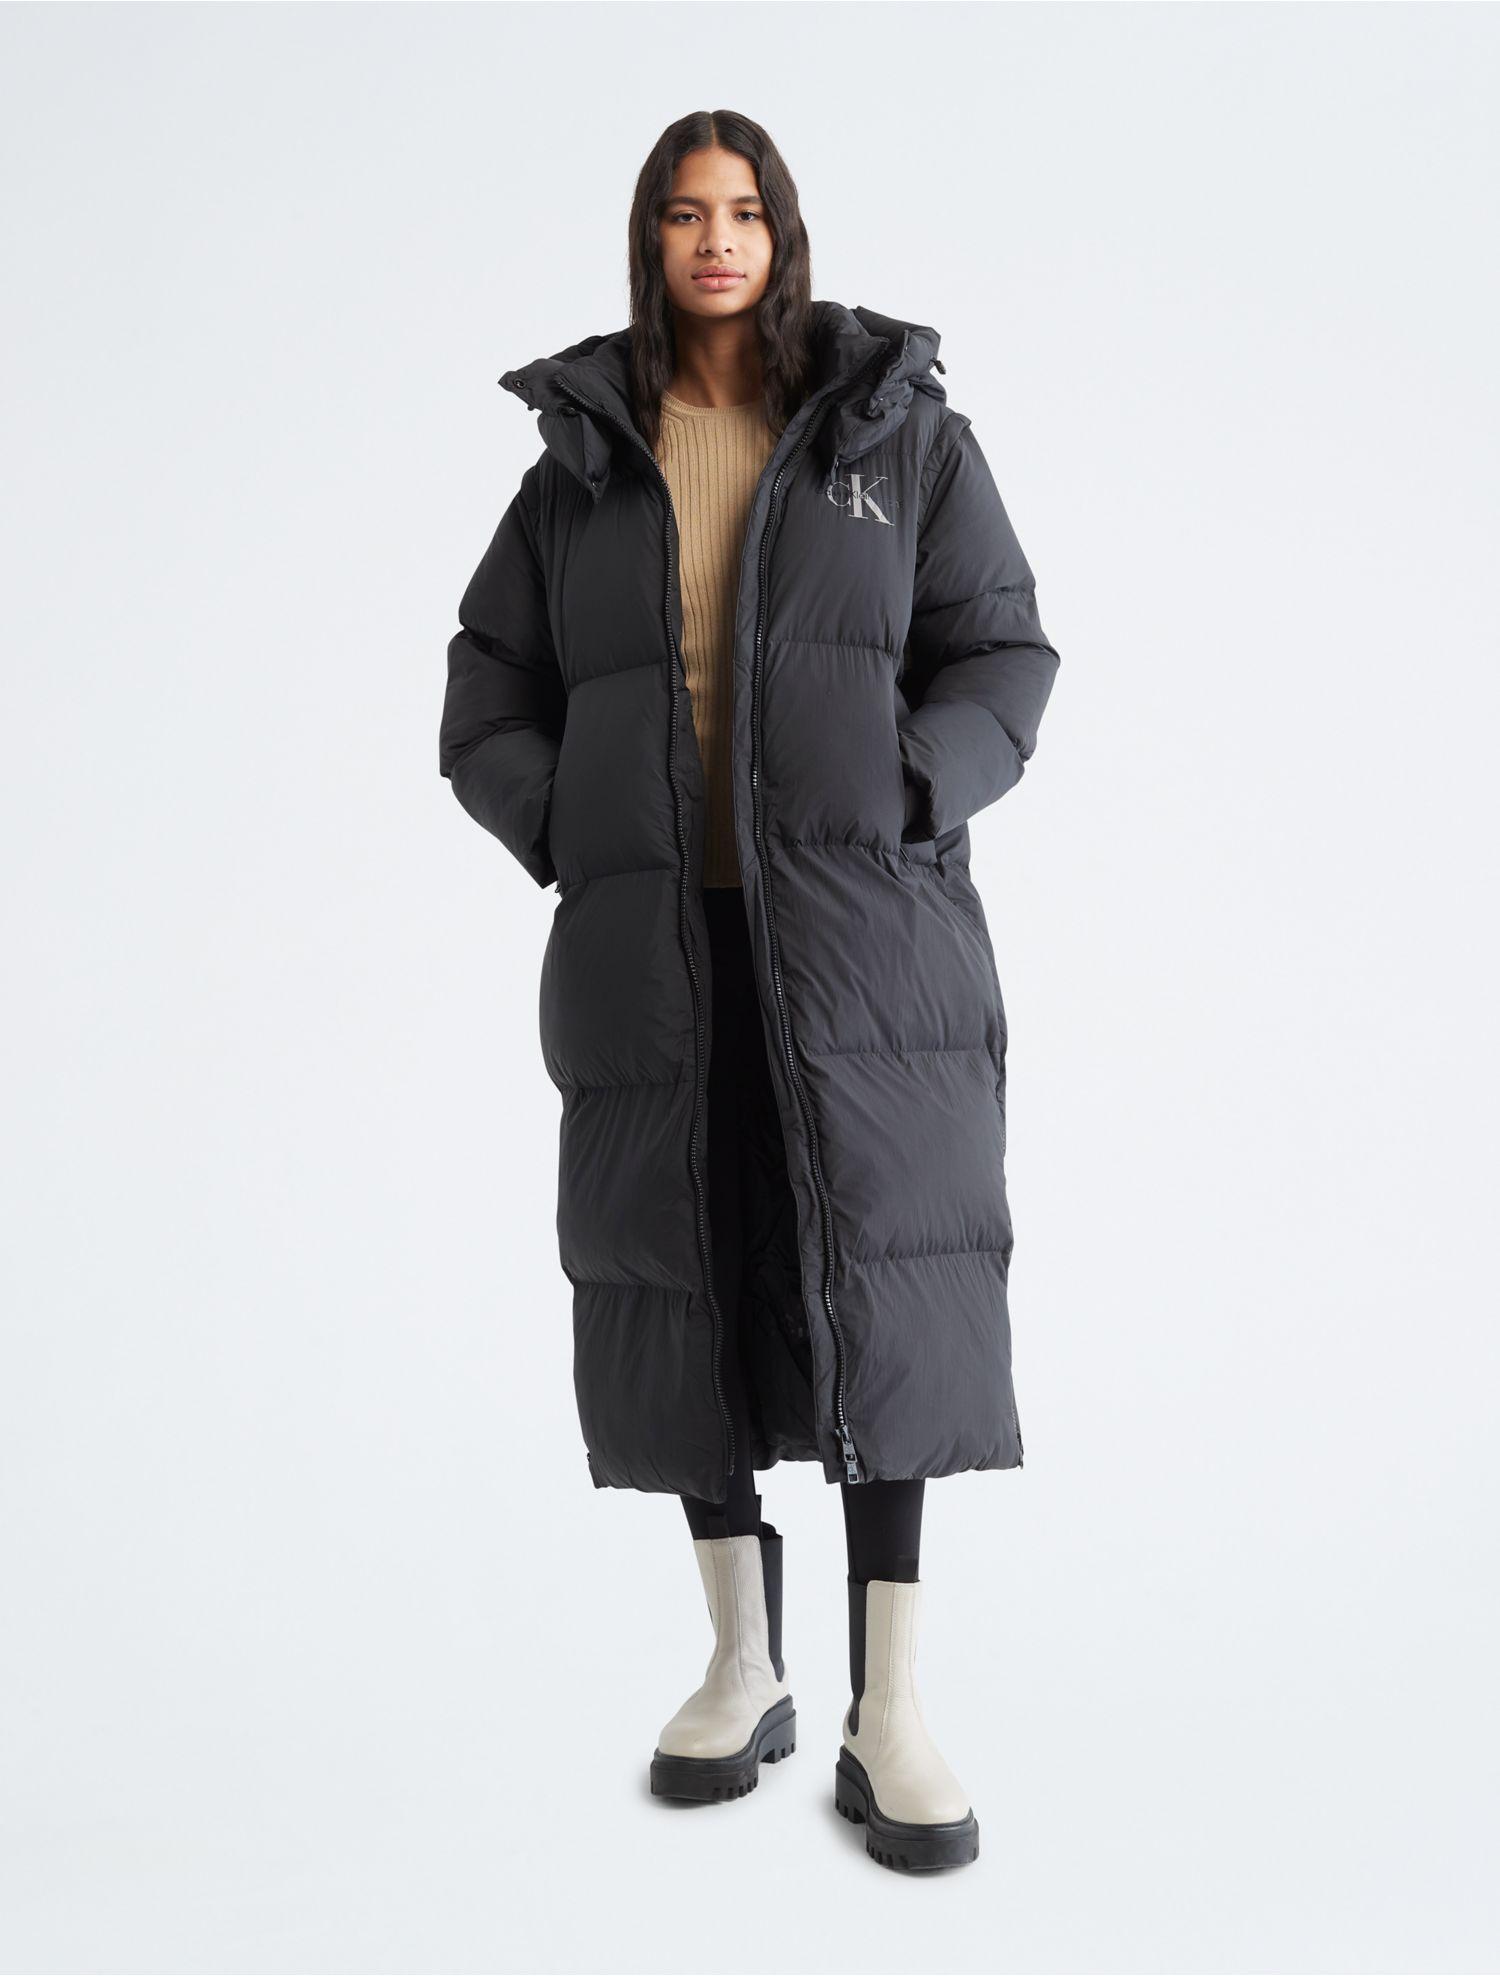 Forbandet Smidighed shuttle Calvin Klein Convertible Long Puffer Jacket in Black | Lyst